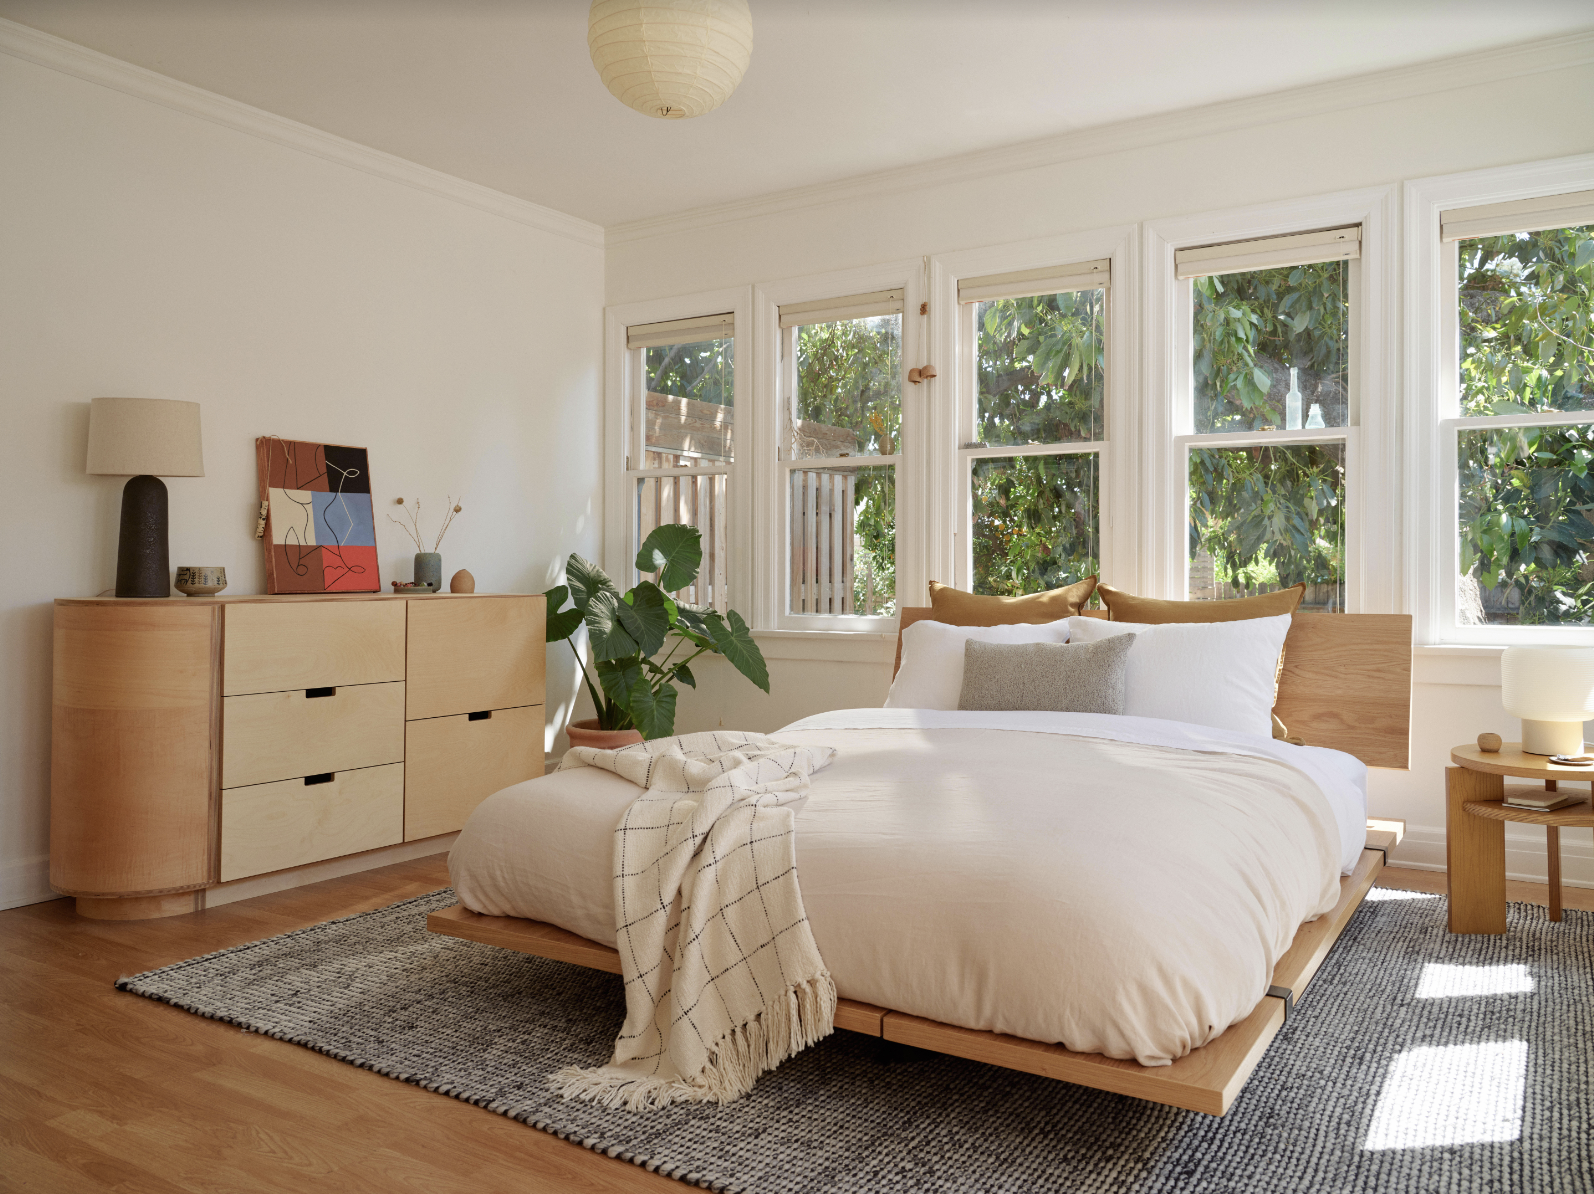 A beautifully designed bedroom is shown